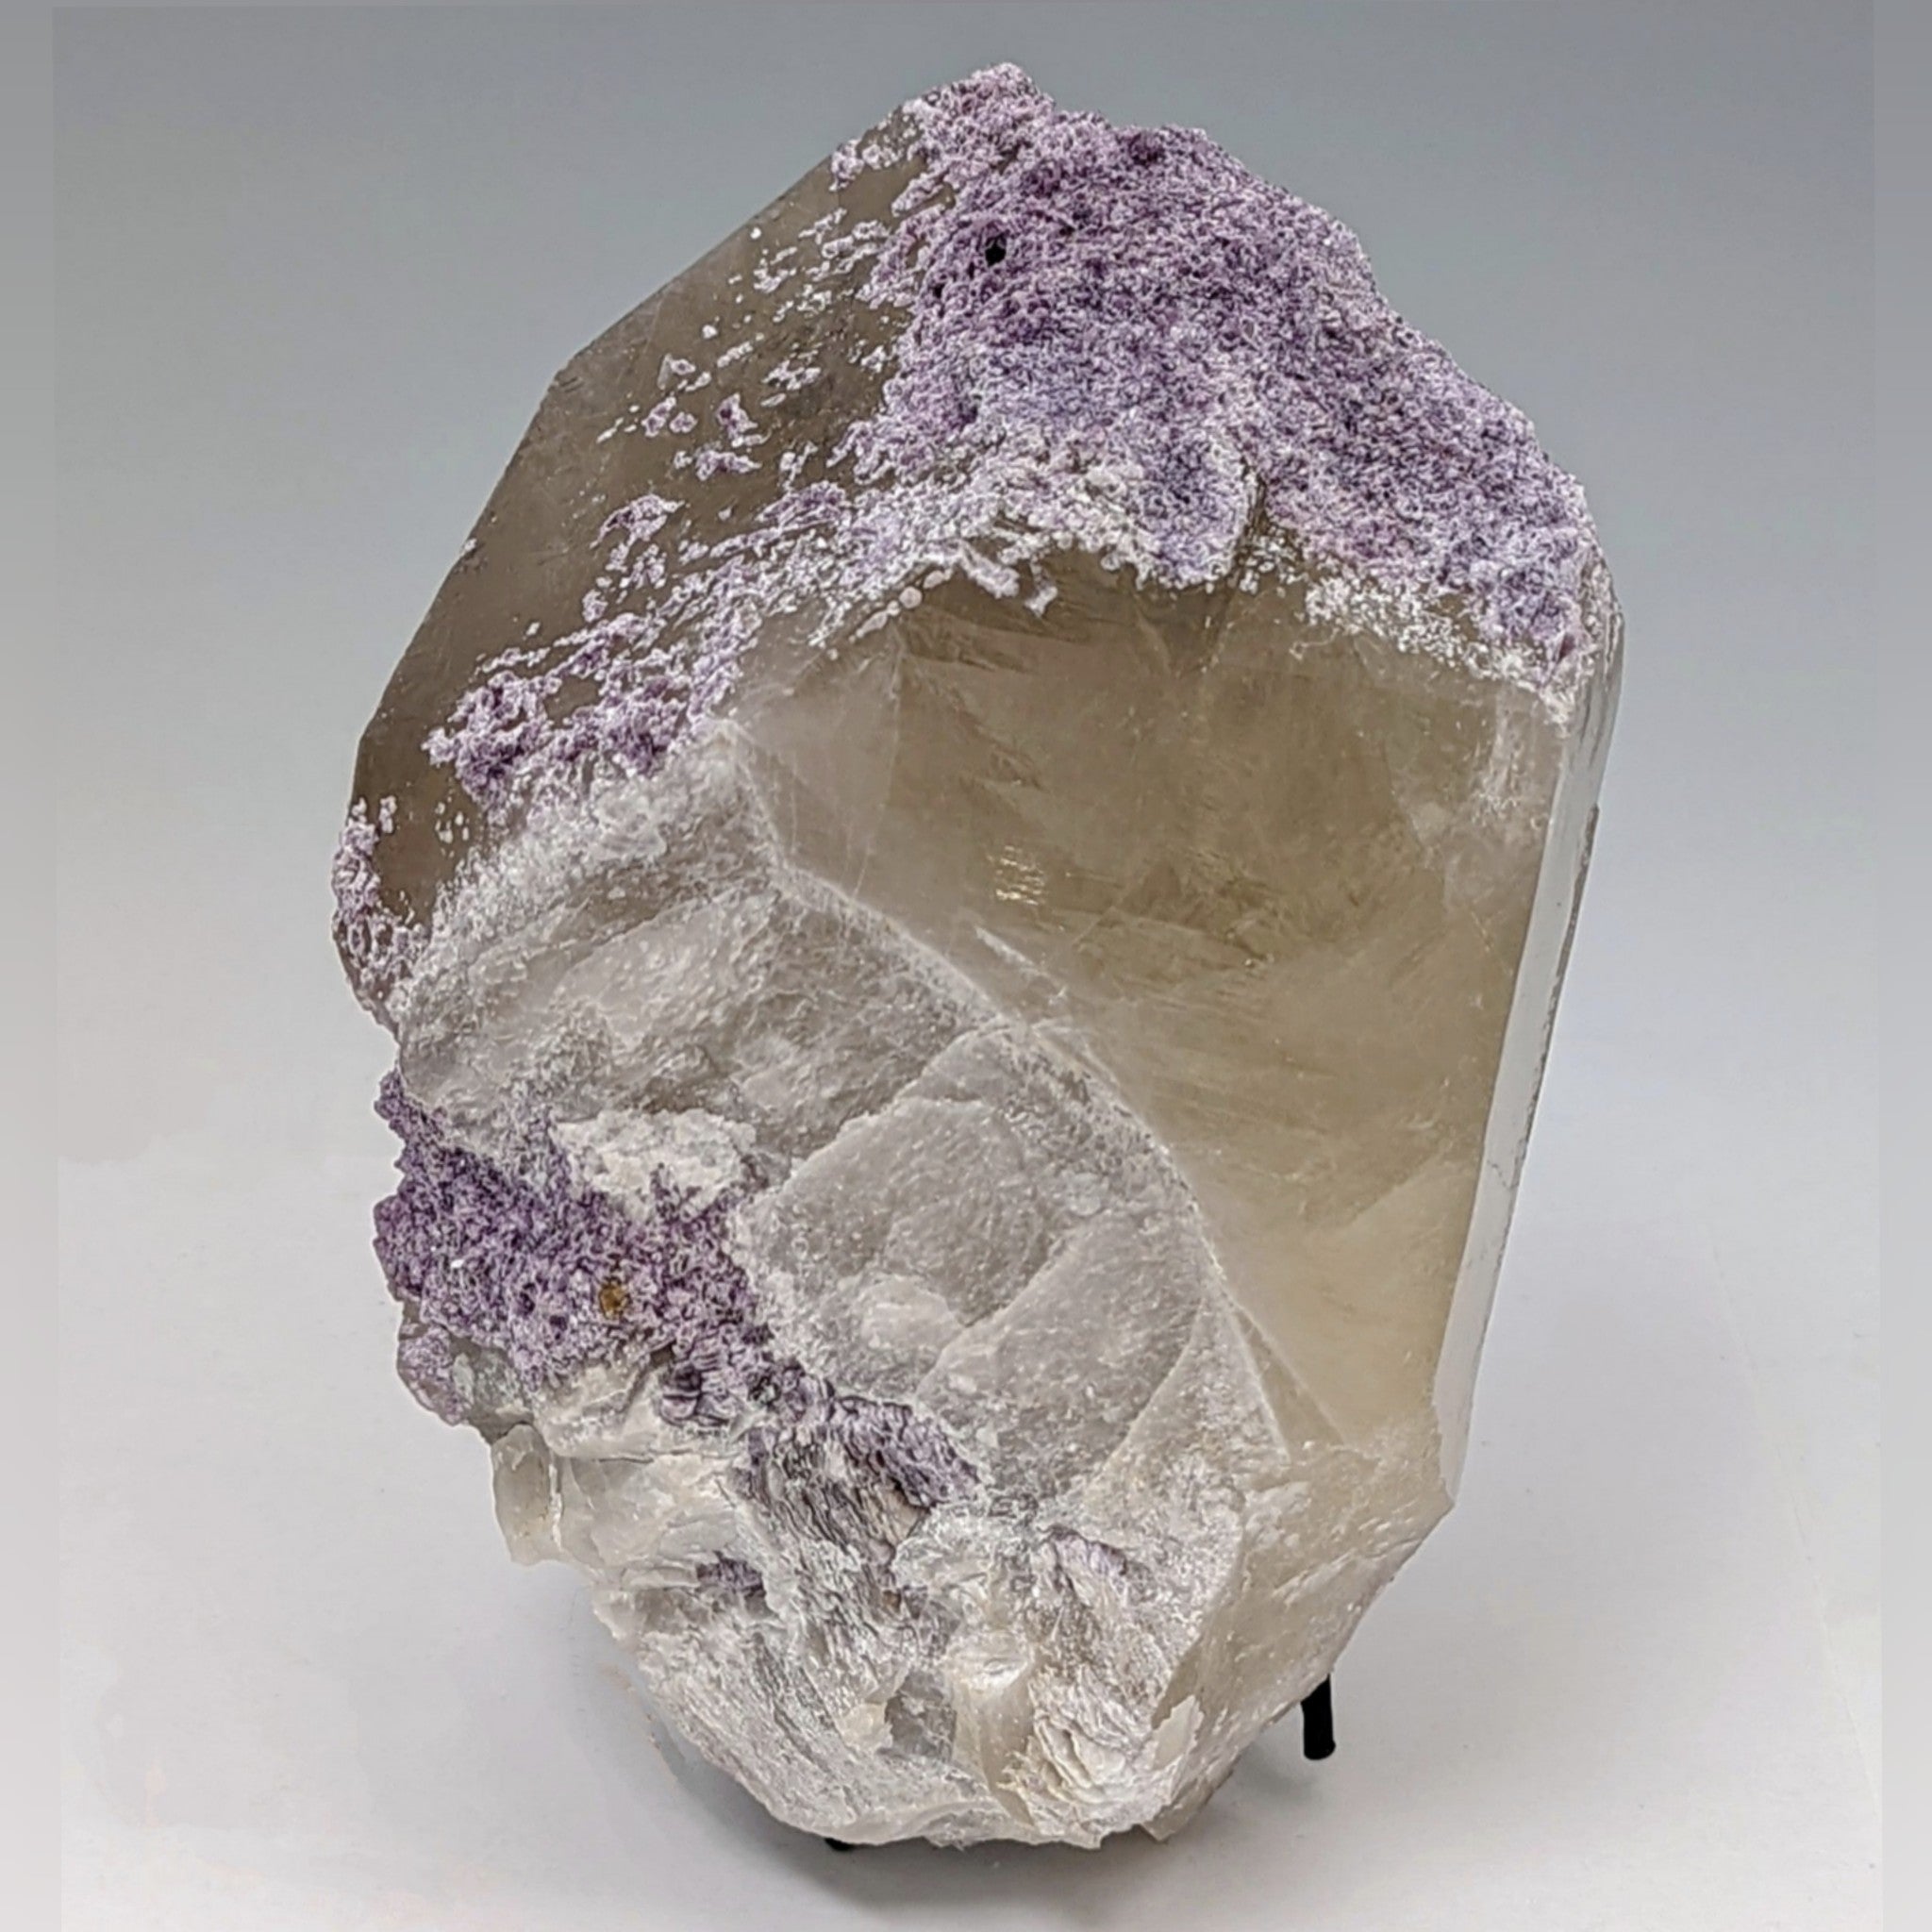 Large Smokey Quartz Crystal with Purple Lepidolite Mineral Covering